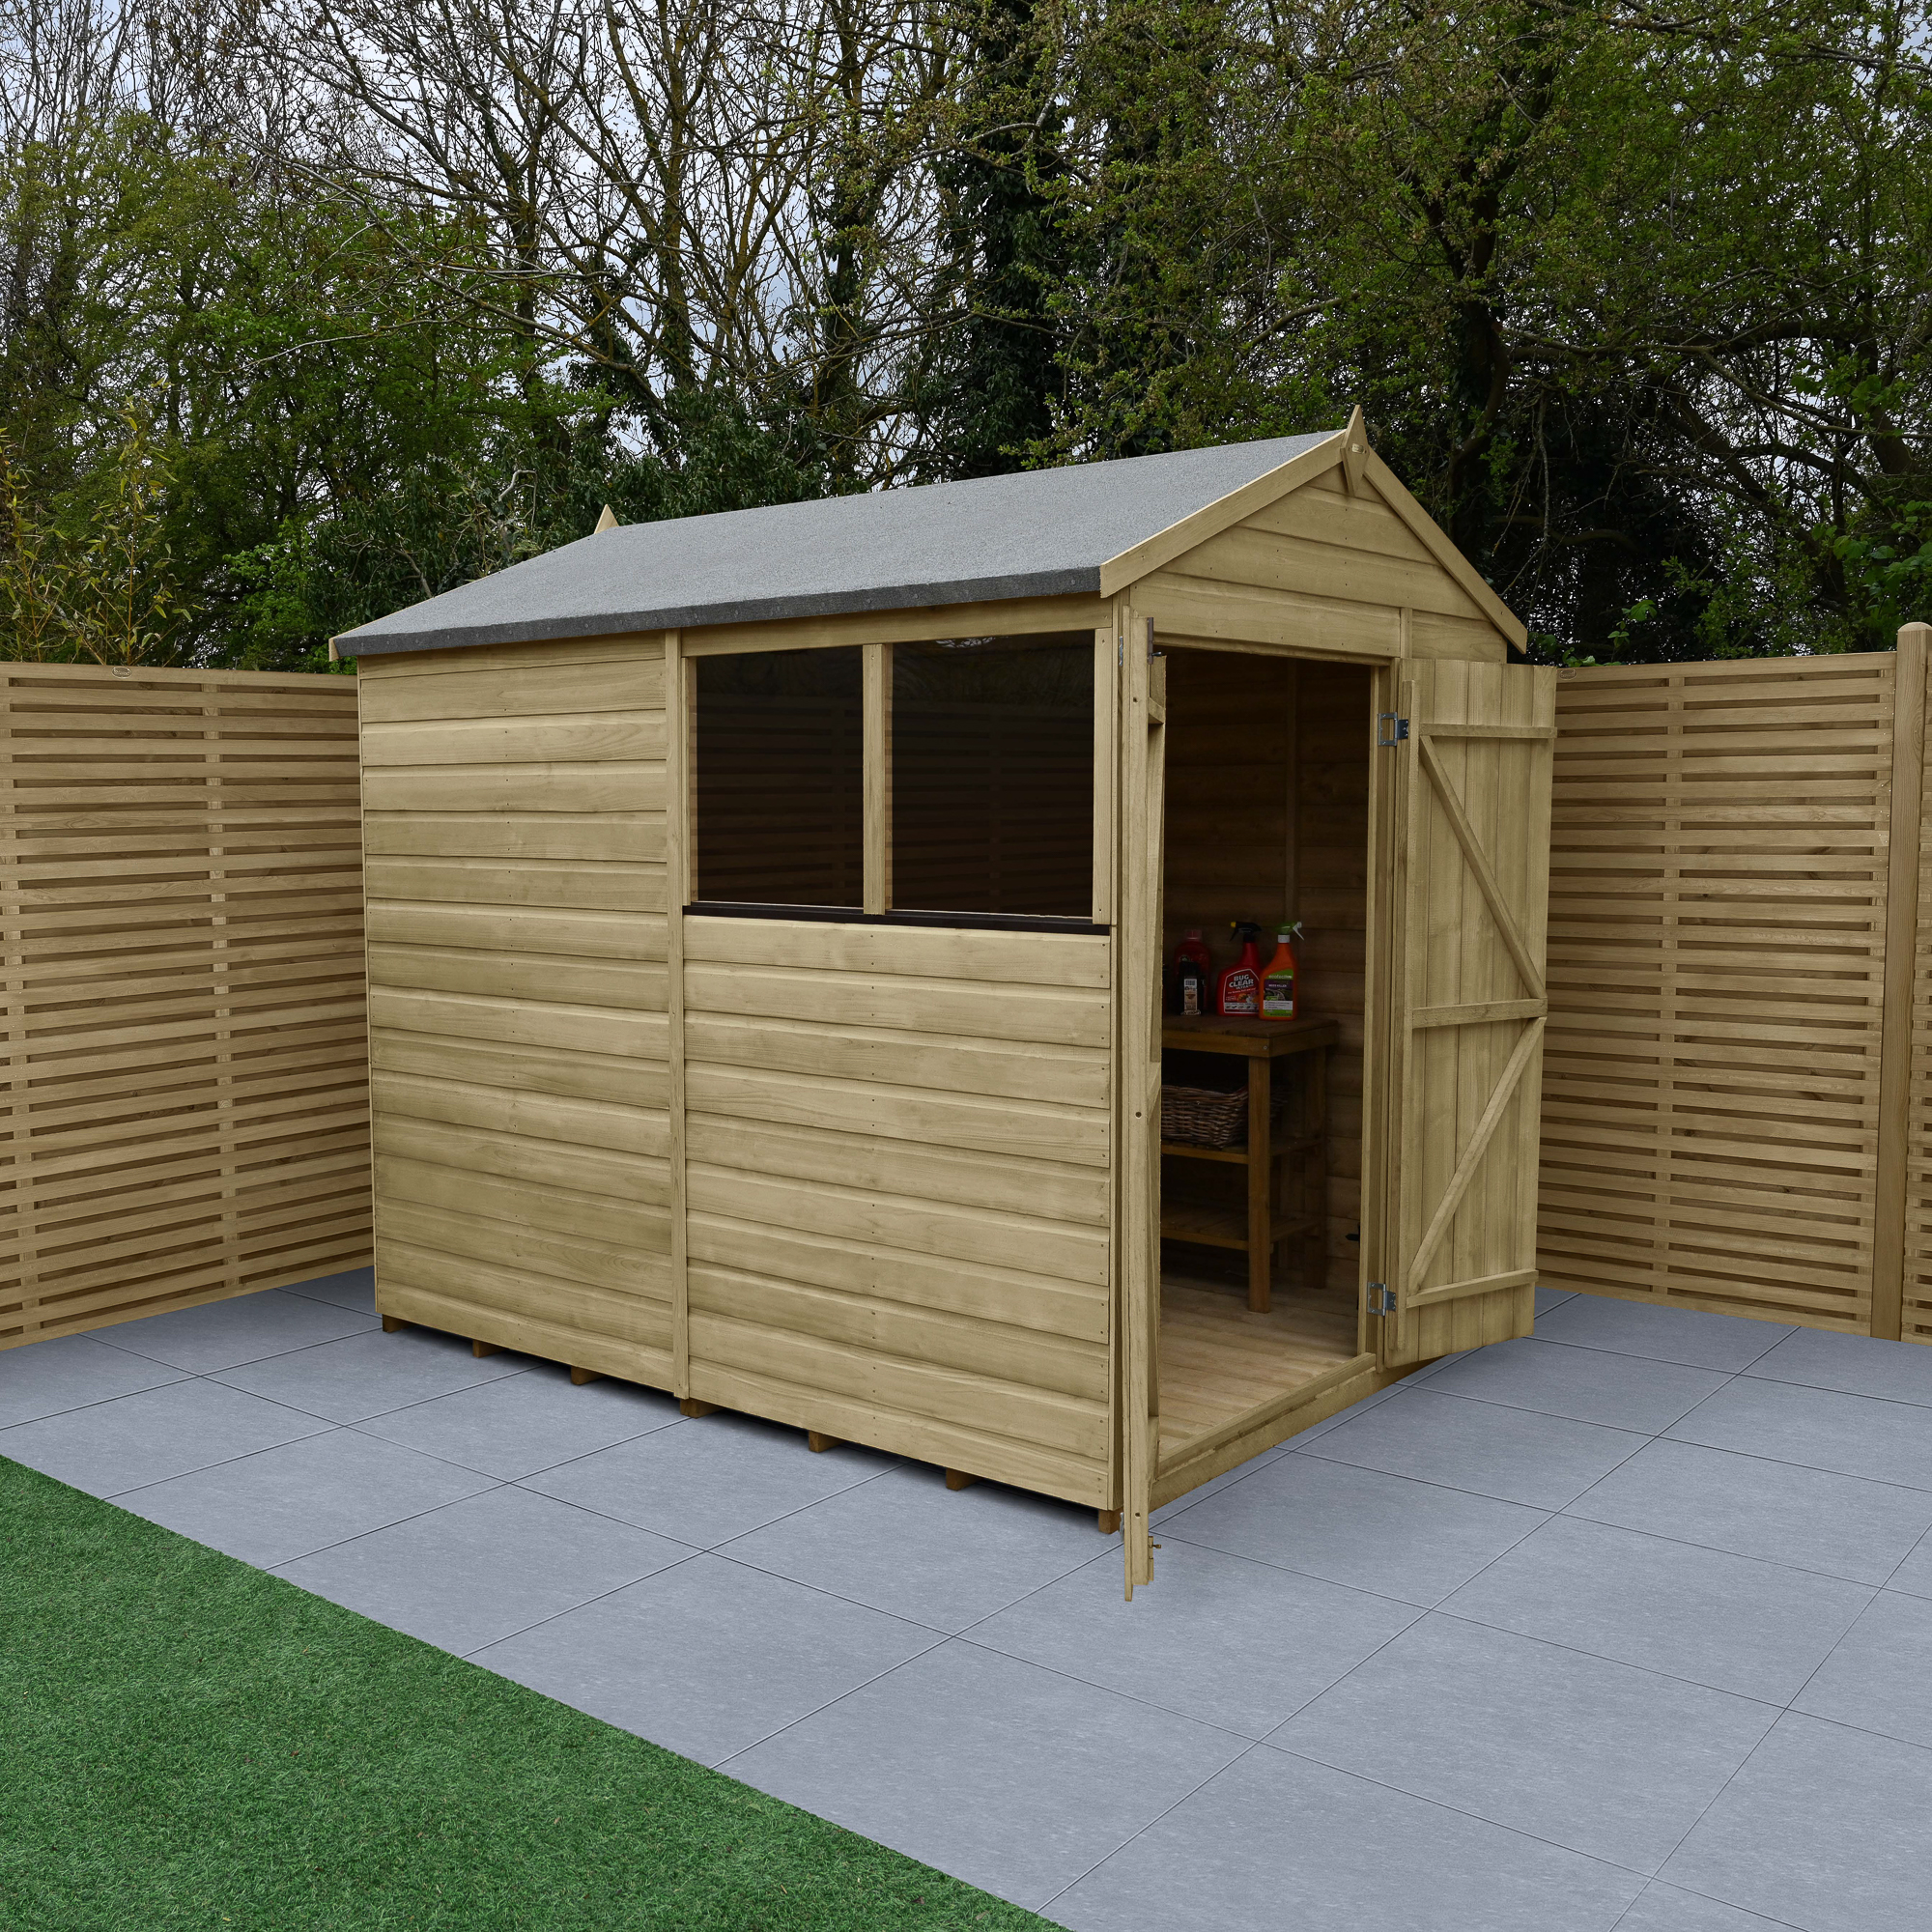 Forest Garden Beckwood 6 x 8ft Apex Shiplap Pressure Treated Double Door Shed